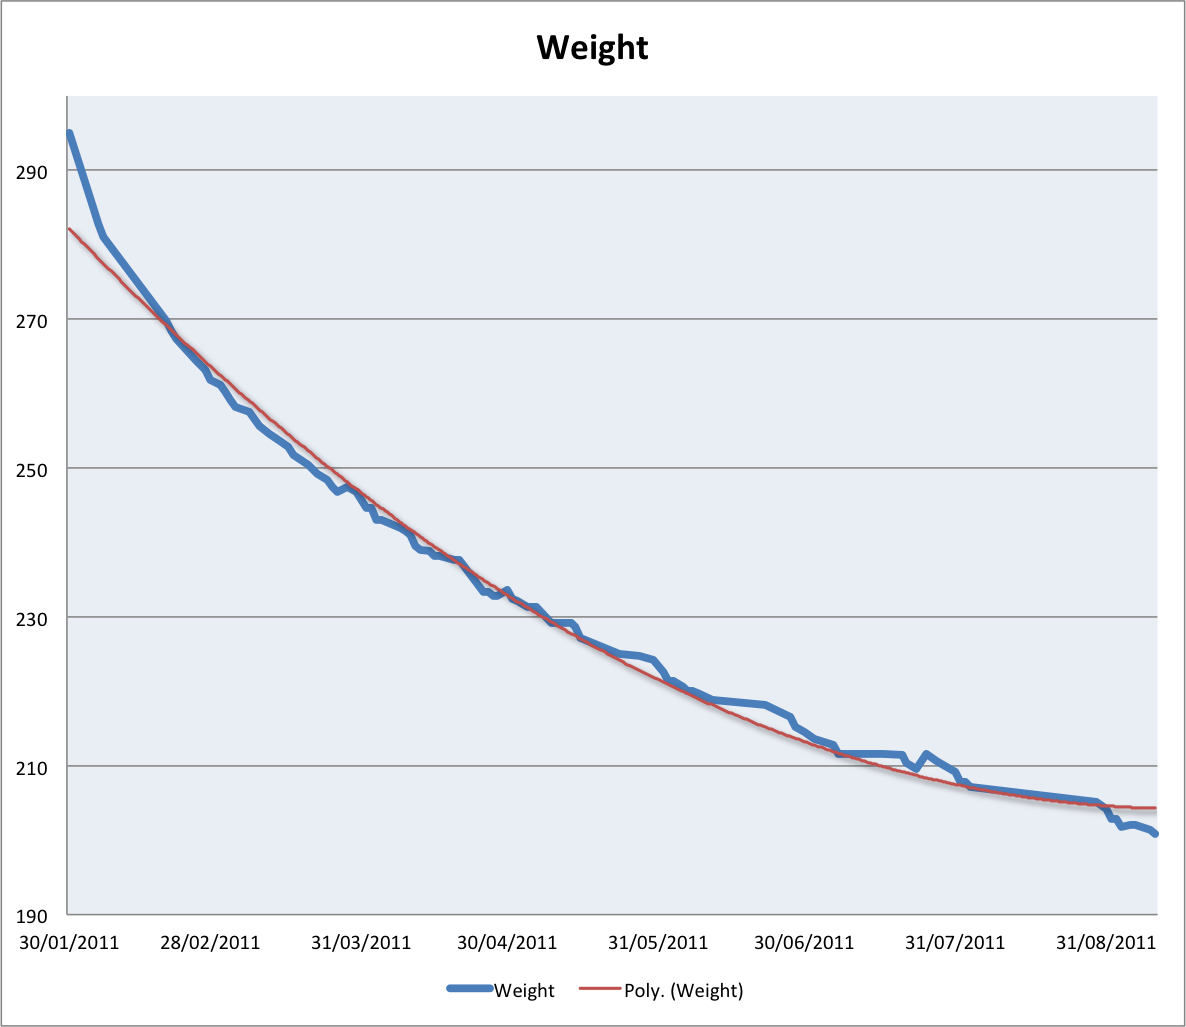 Weight loss from FEb 2011 to Sep 2011 chart